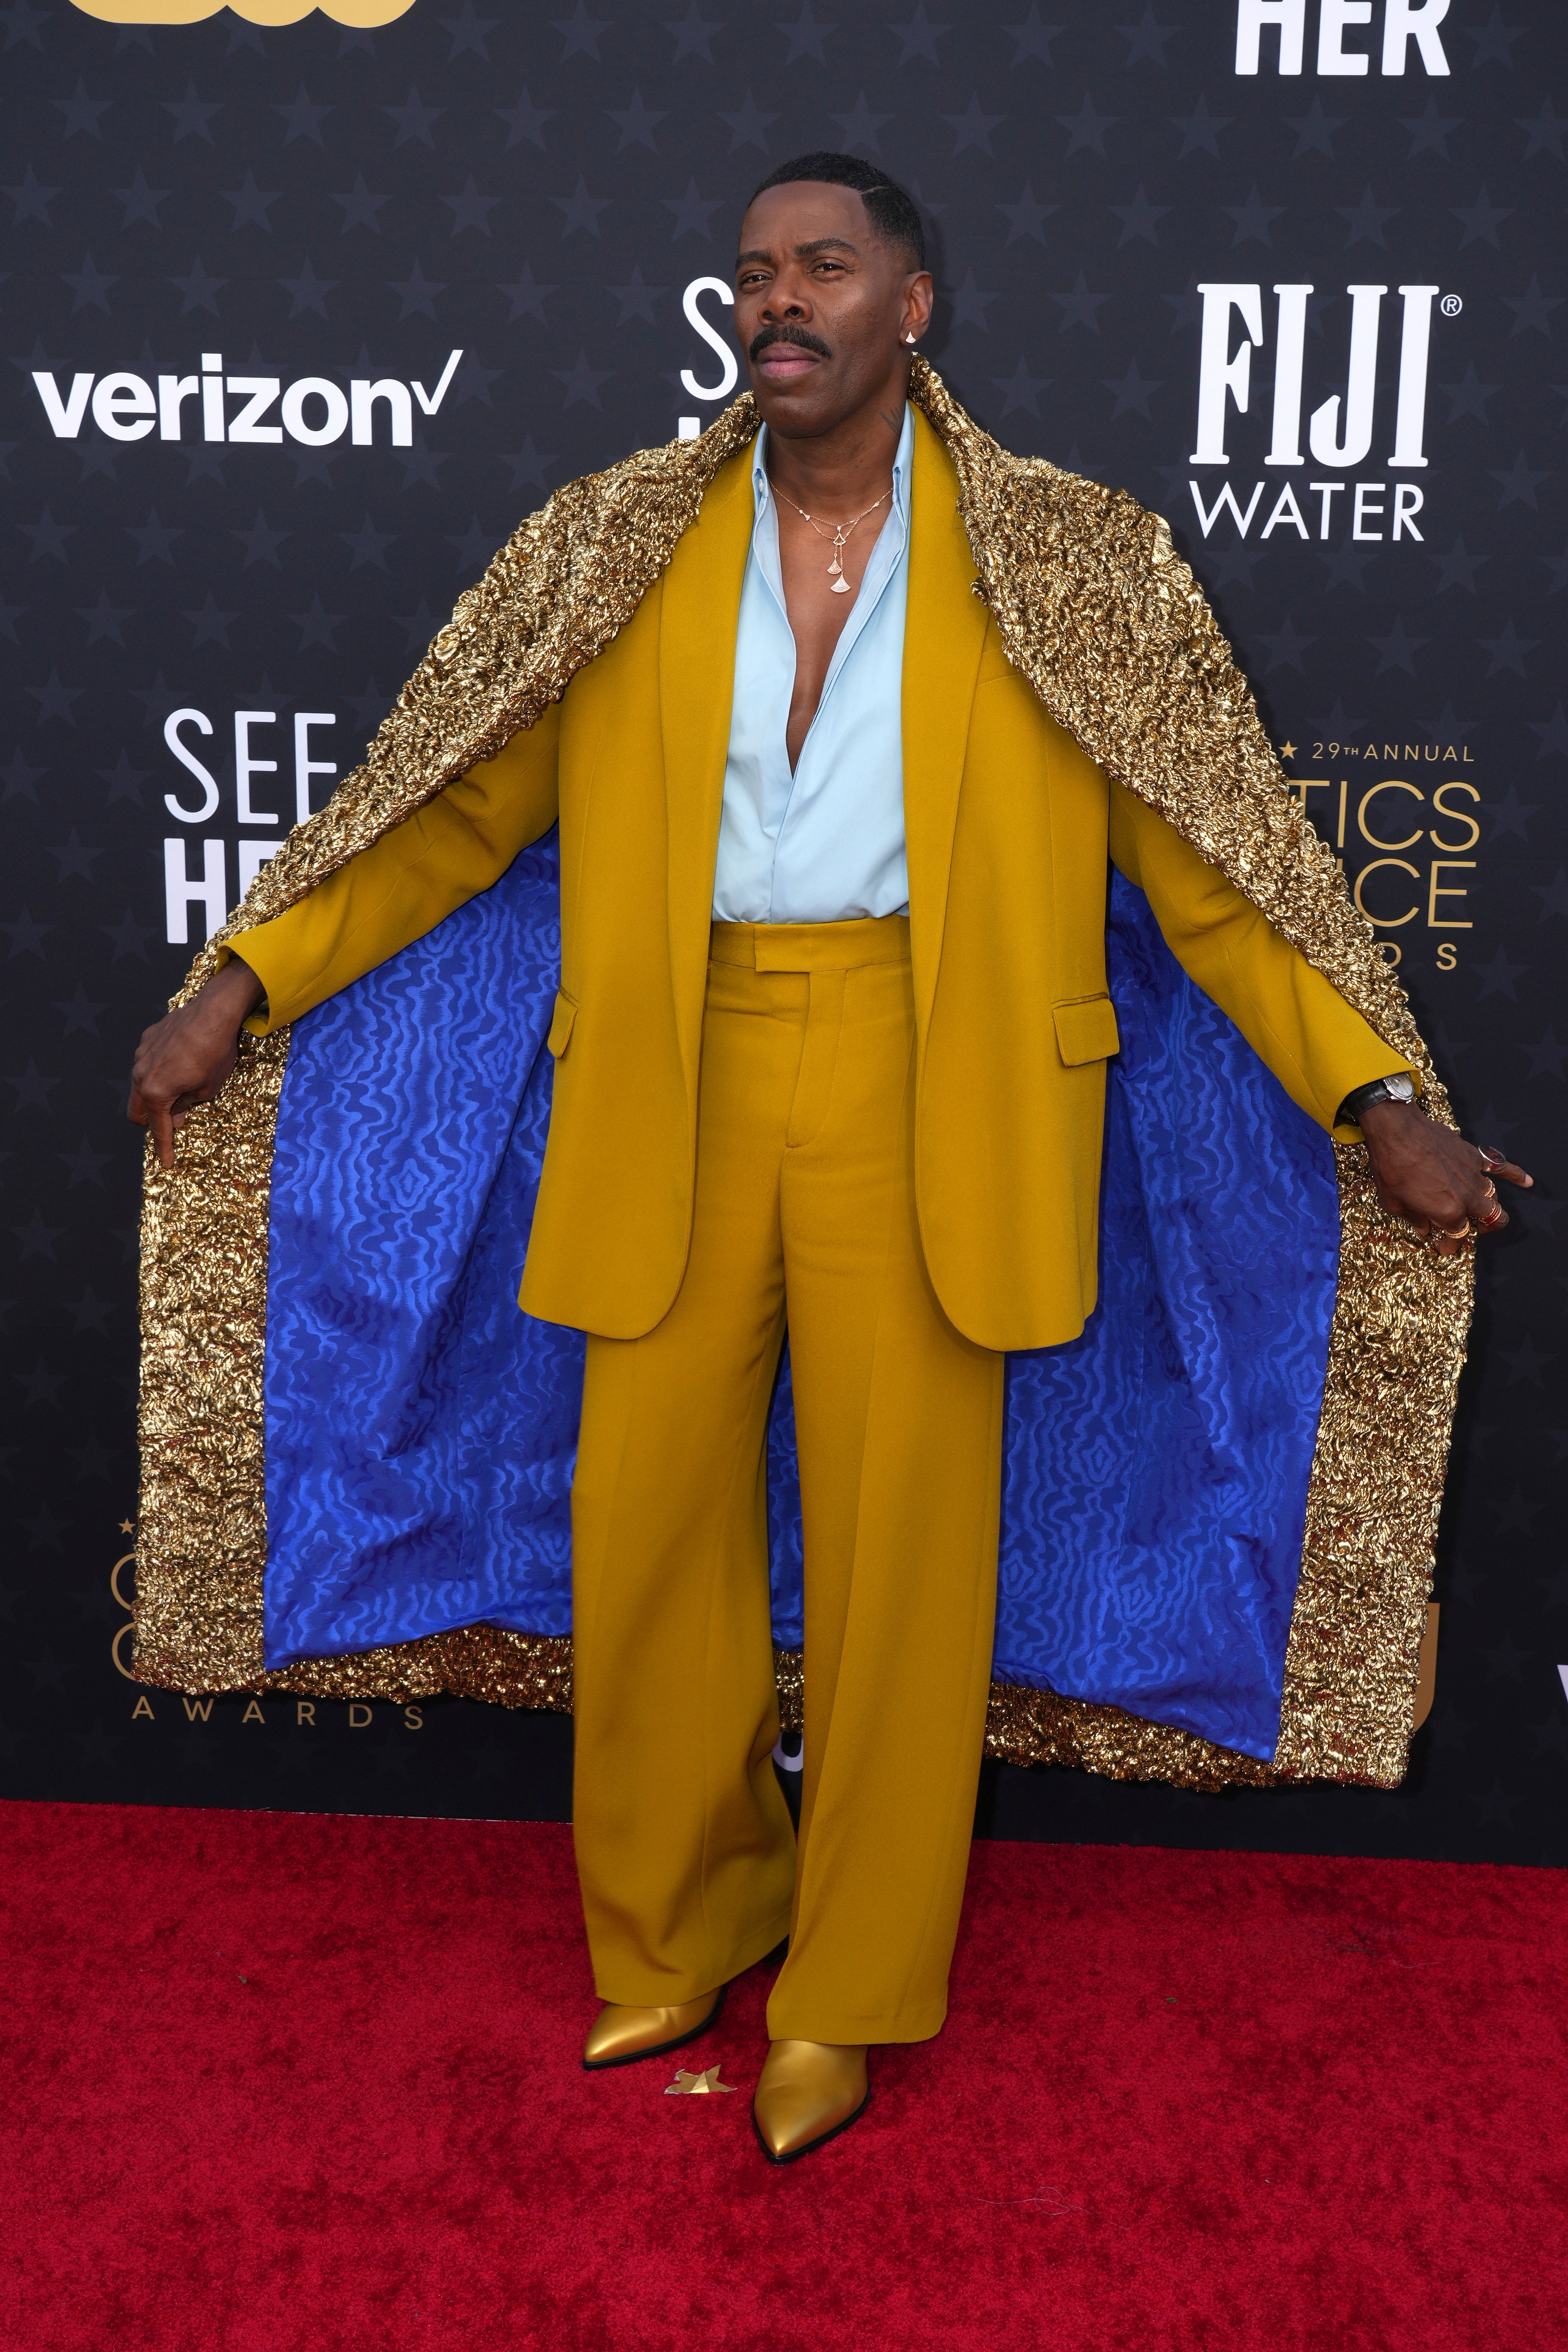 Colman Domingo wearing a gold suit with a white, flowy shirt and a cape with gold metallic detailing outside and blue lining